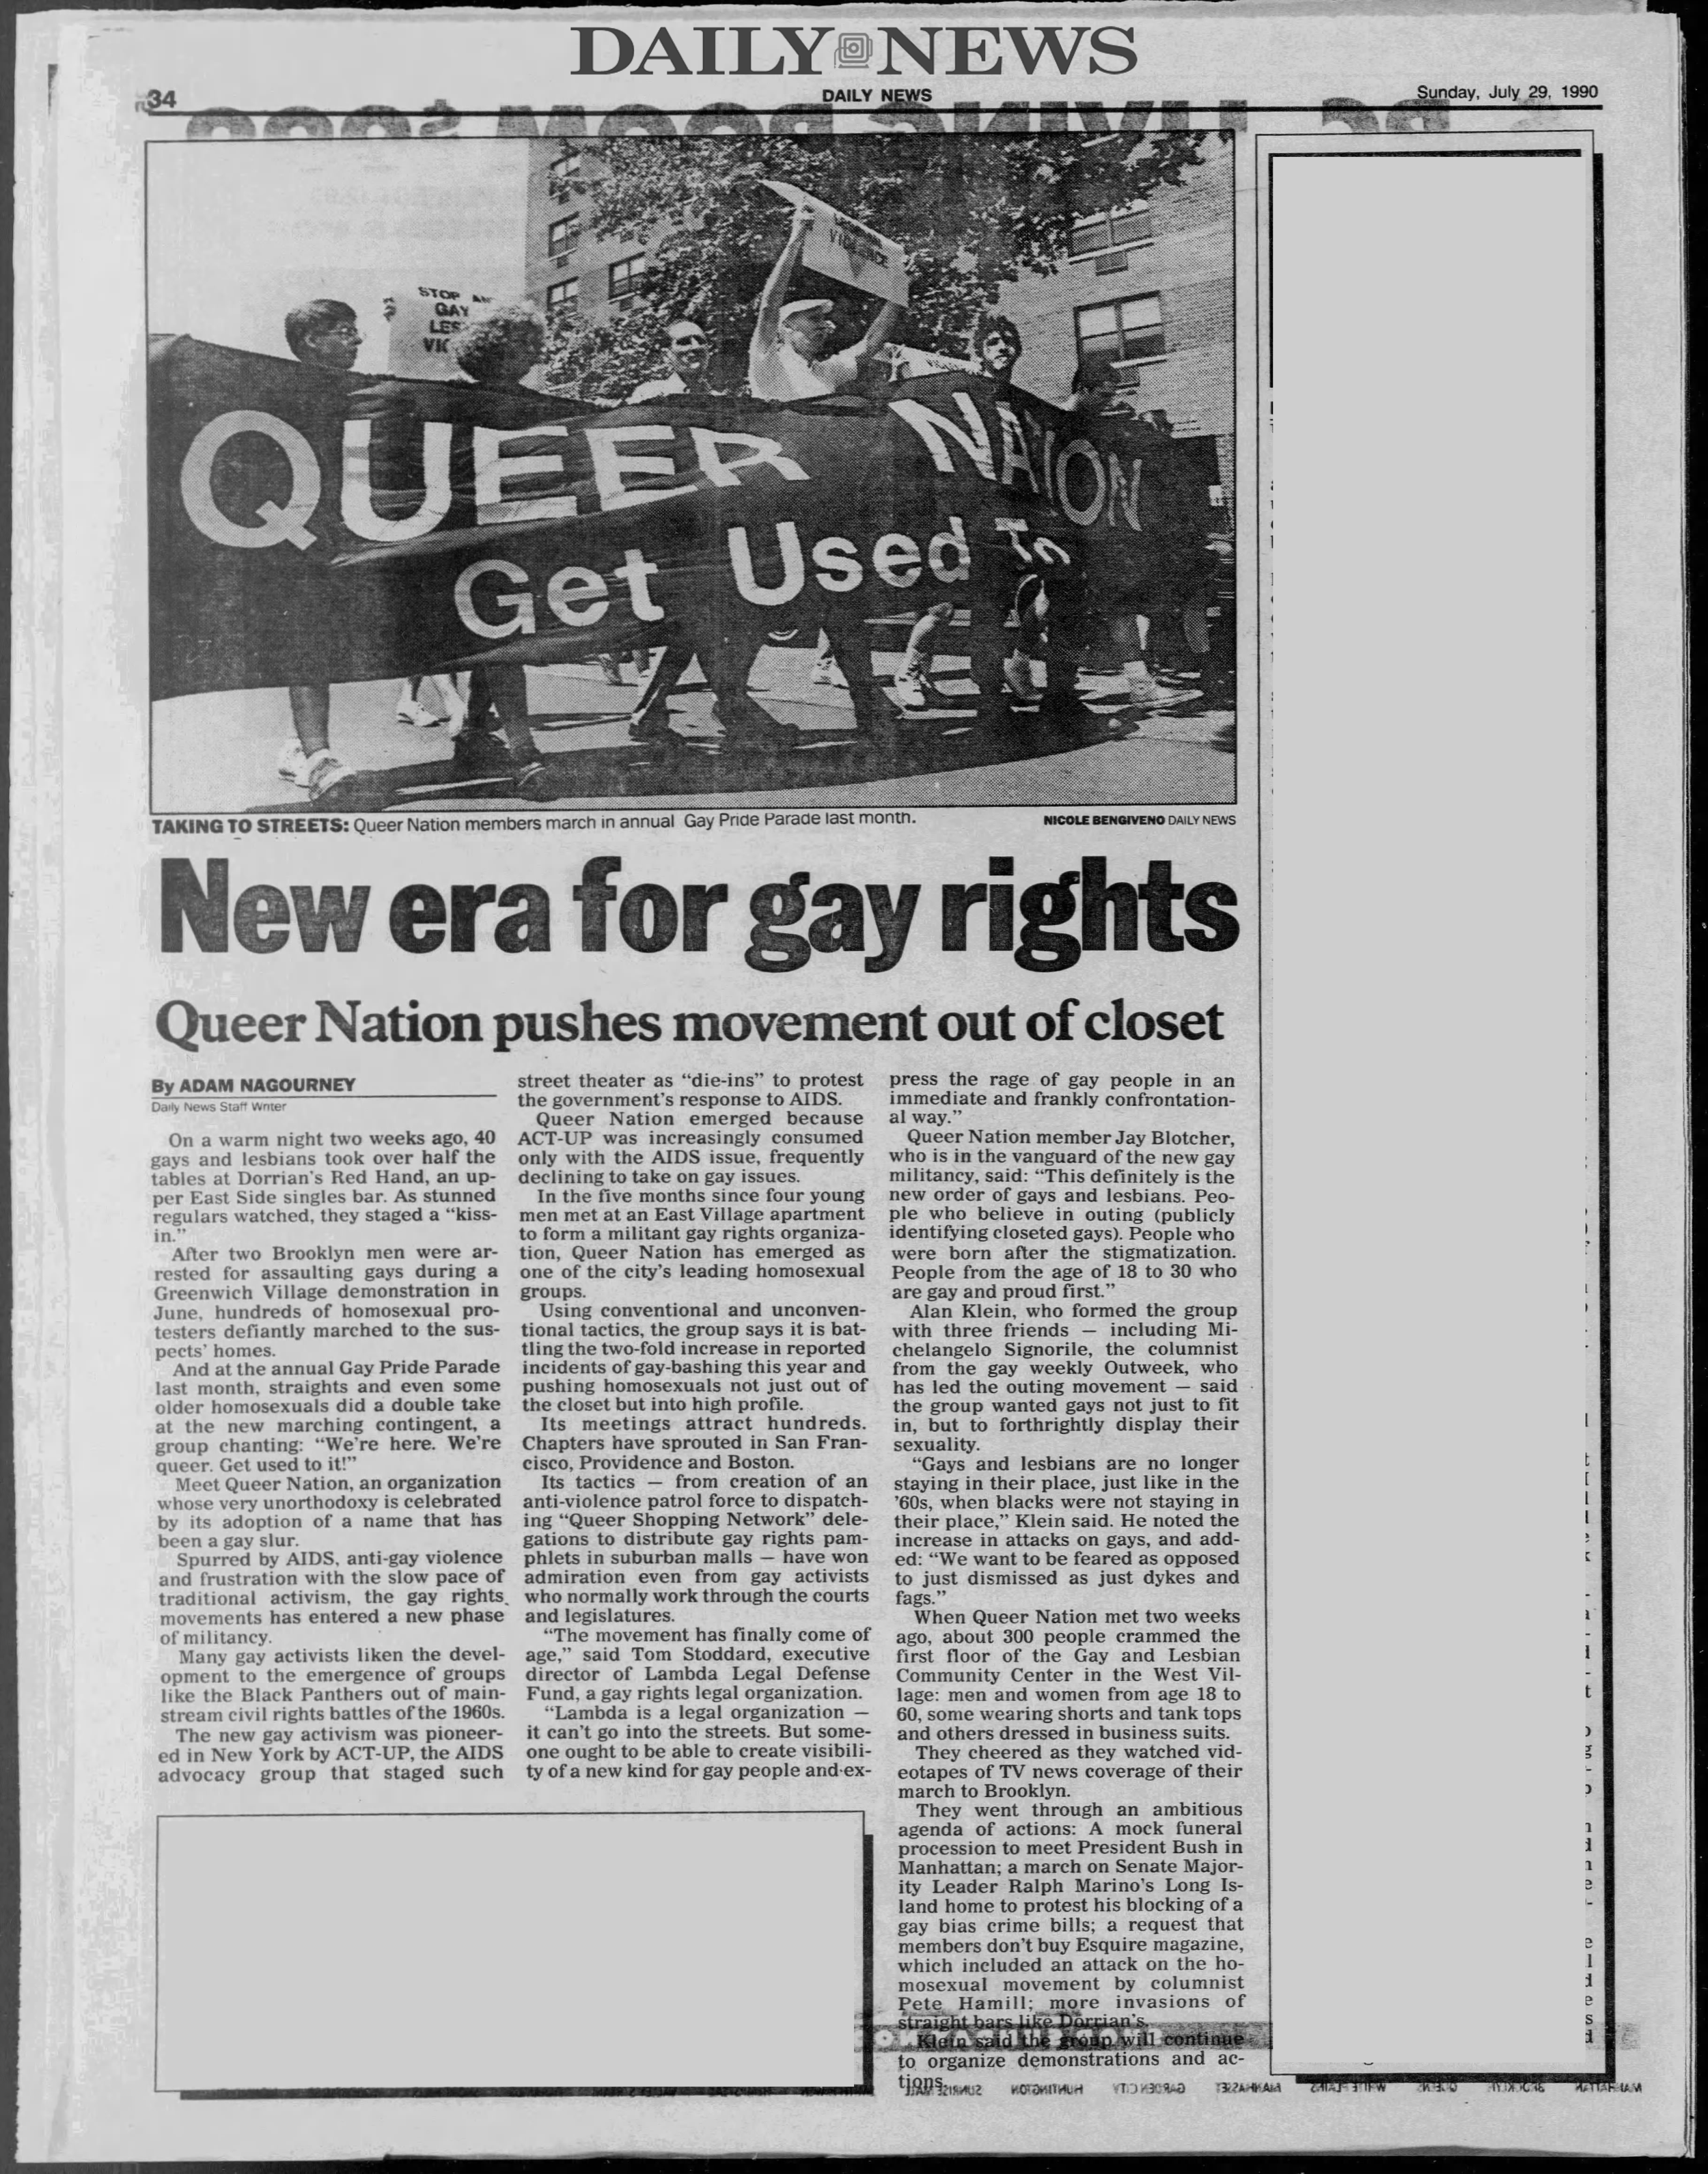 Daily News: "New era for gay rights; Queer Nation pushes movement out of closet"